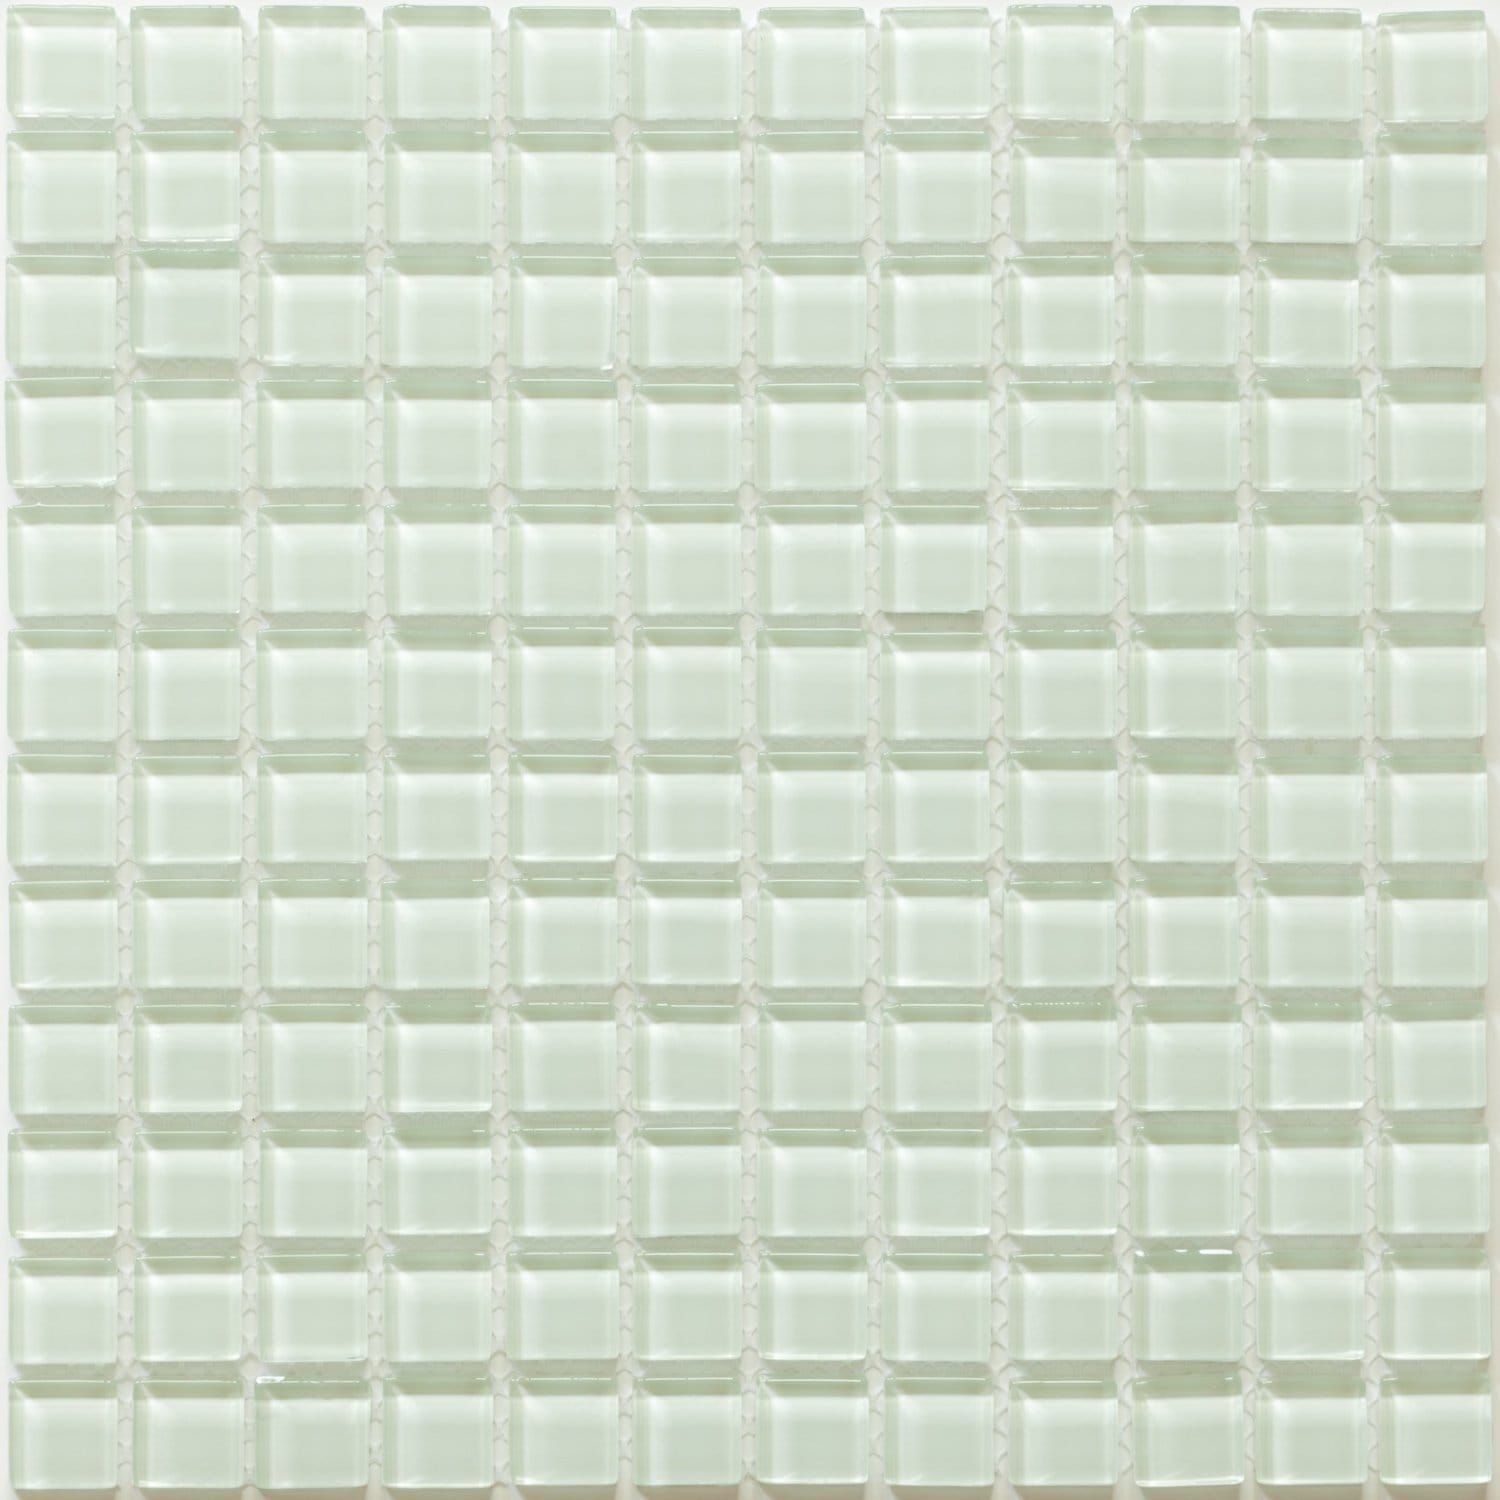 Martini Mosaic 12x12 Piazza Delicate Mint Tile (pack Of 10)